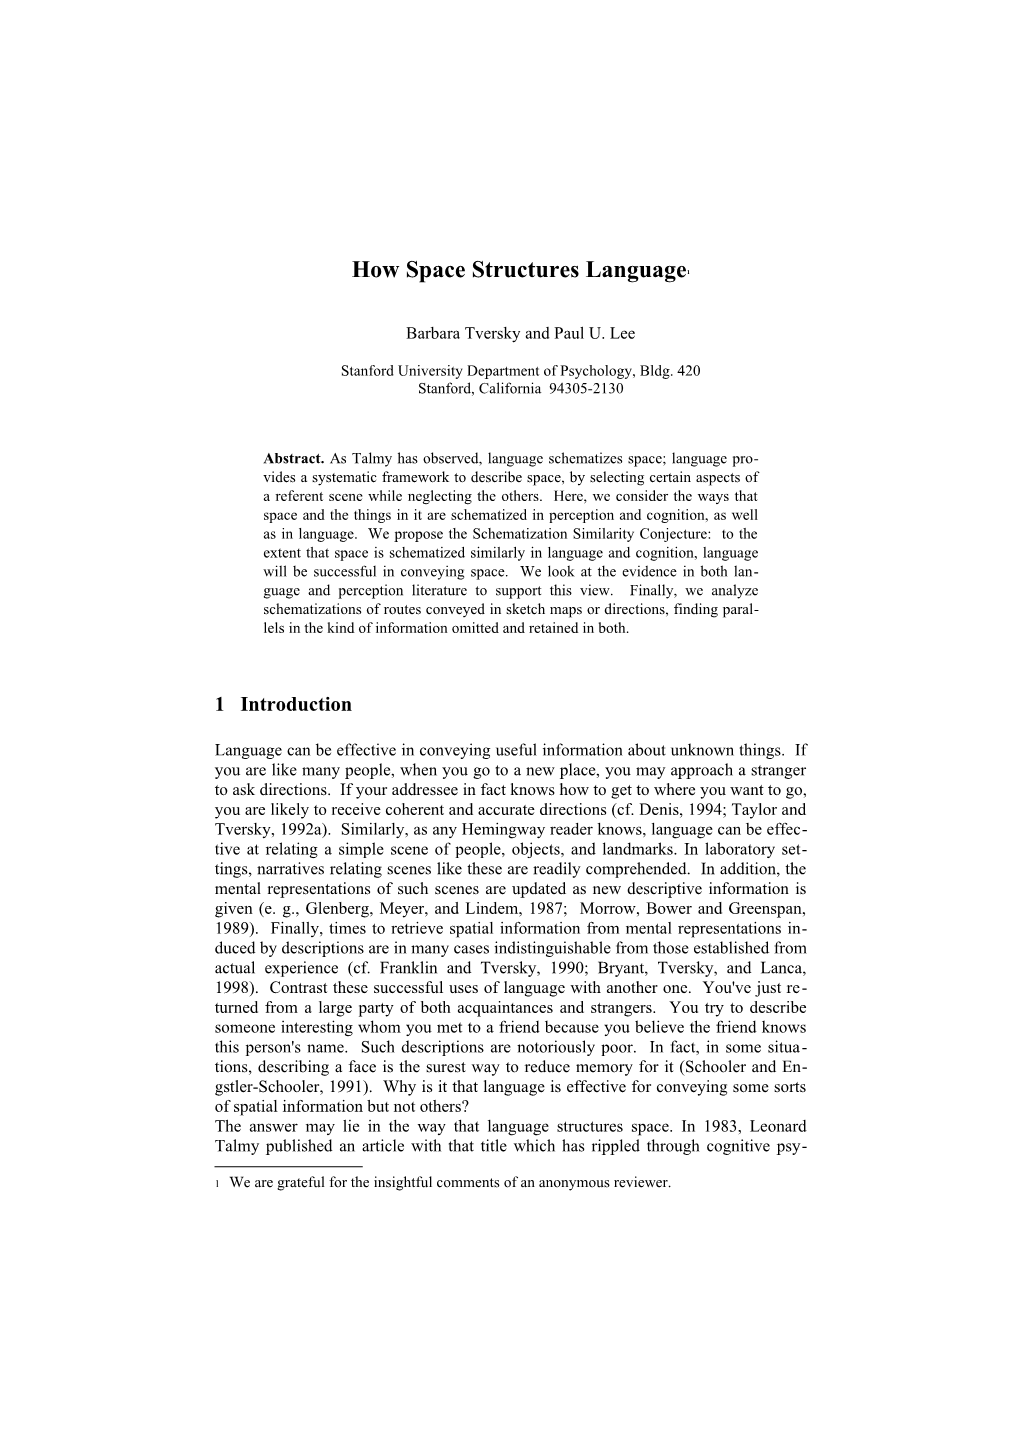 How Space Structures Language